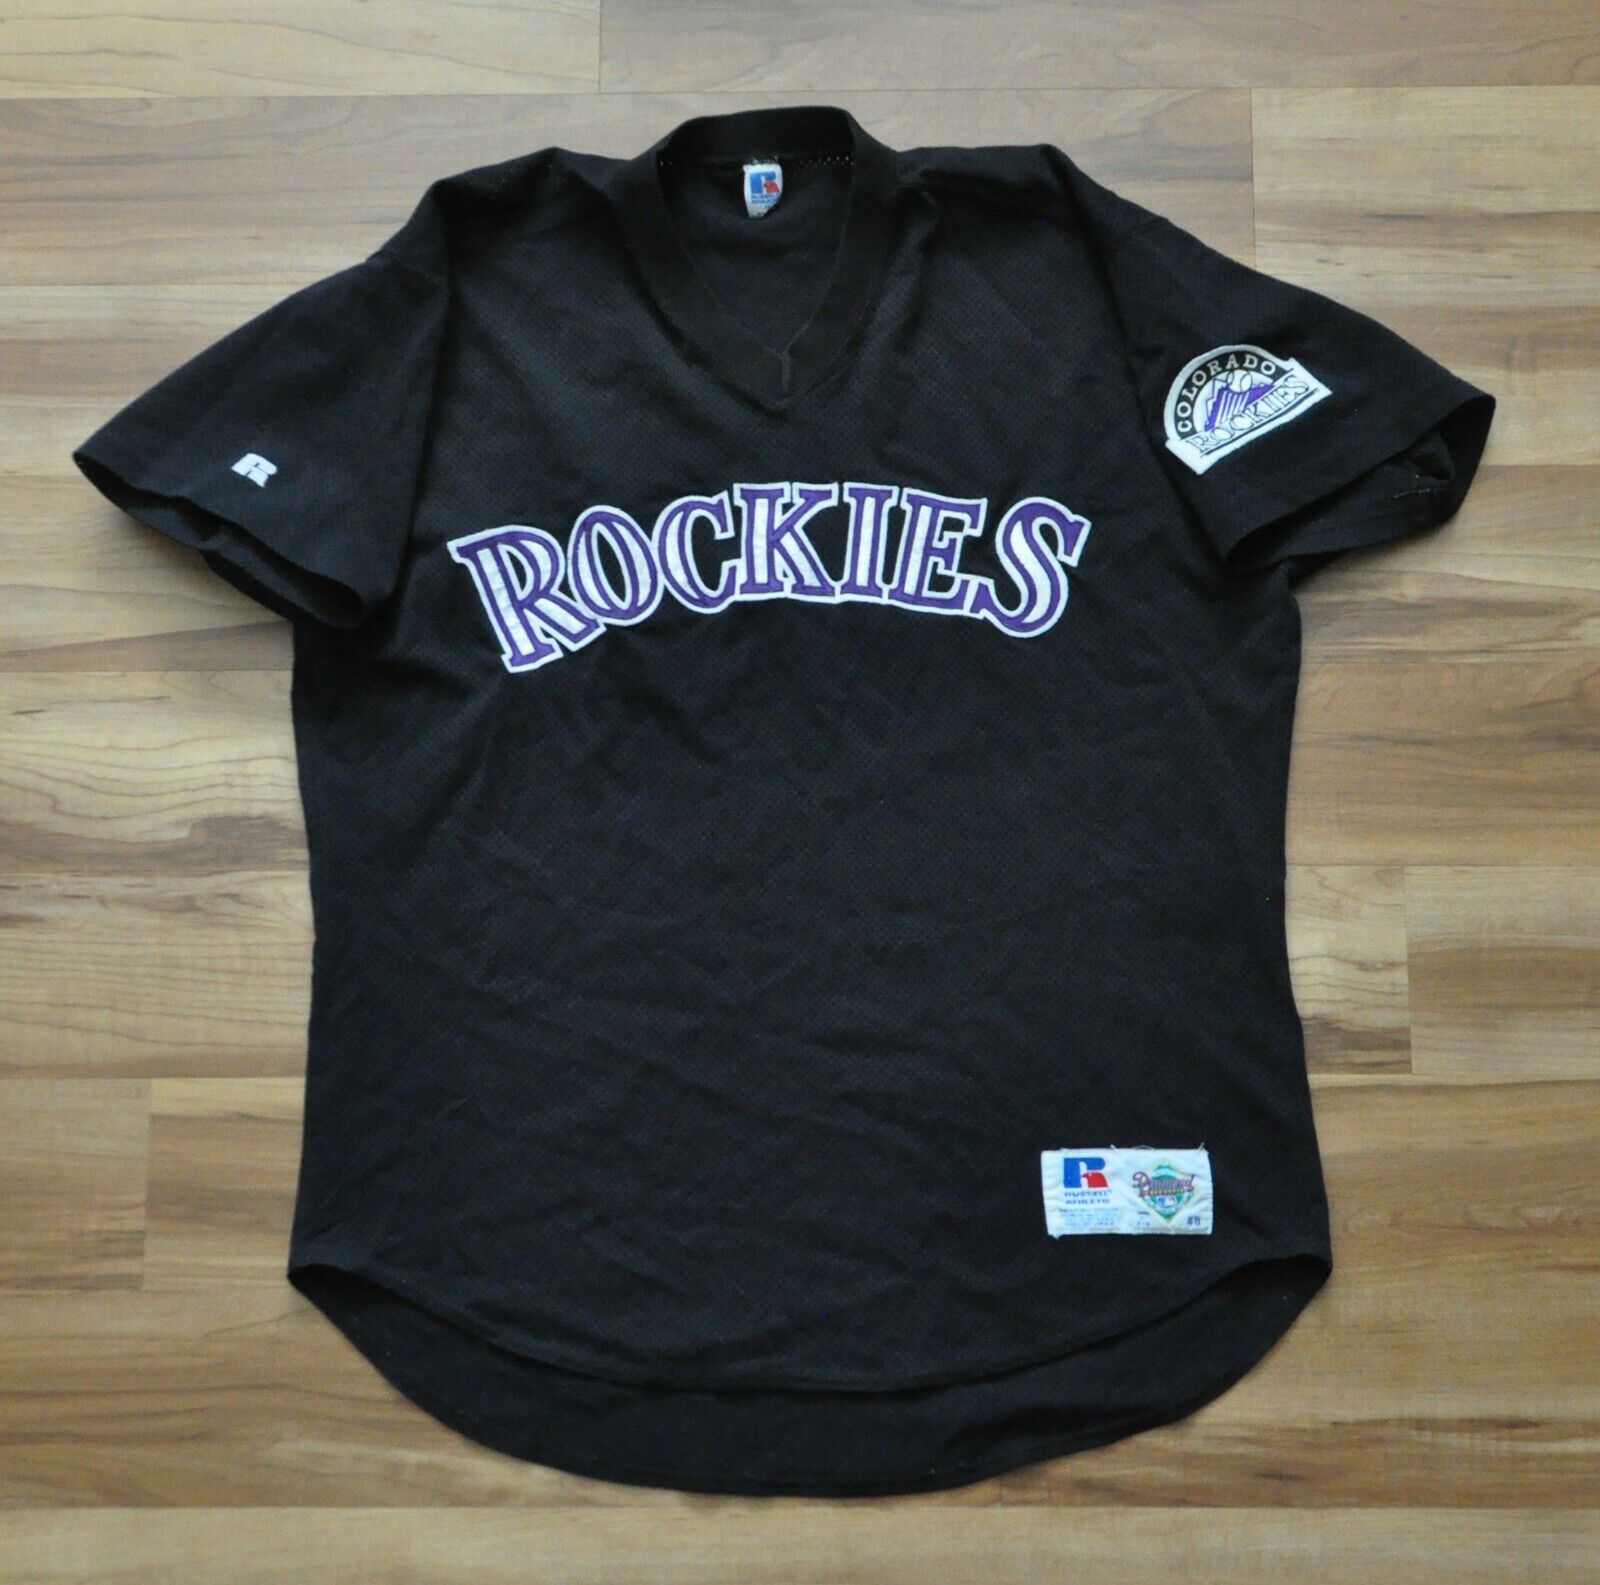 Colorado Rockies Russell Jersey Blank Pull Over Black Sewn MLB Sewn Men 48 XL